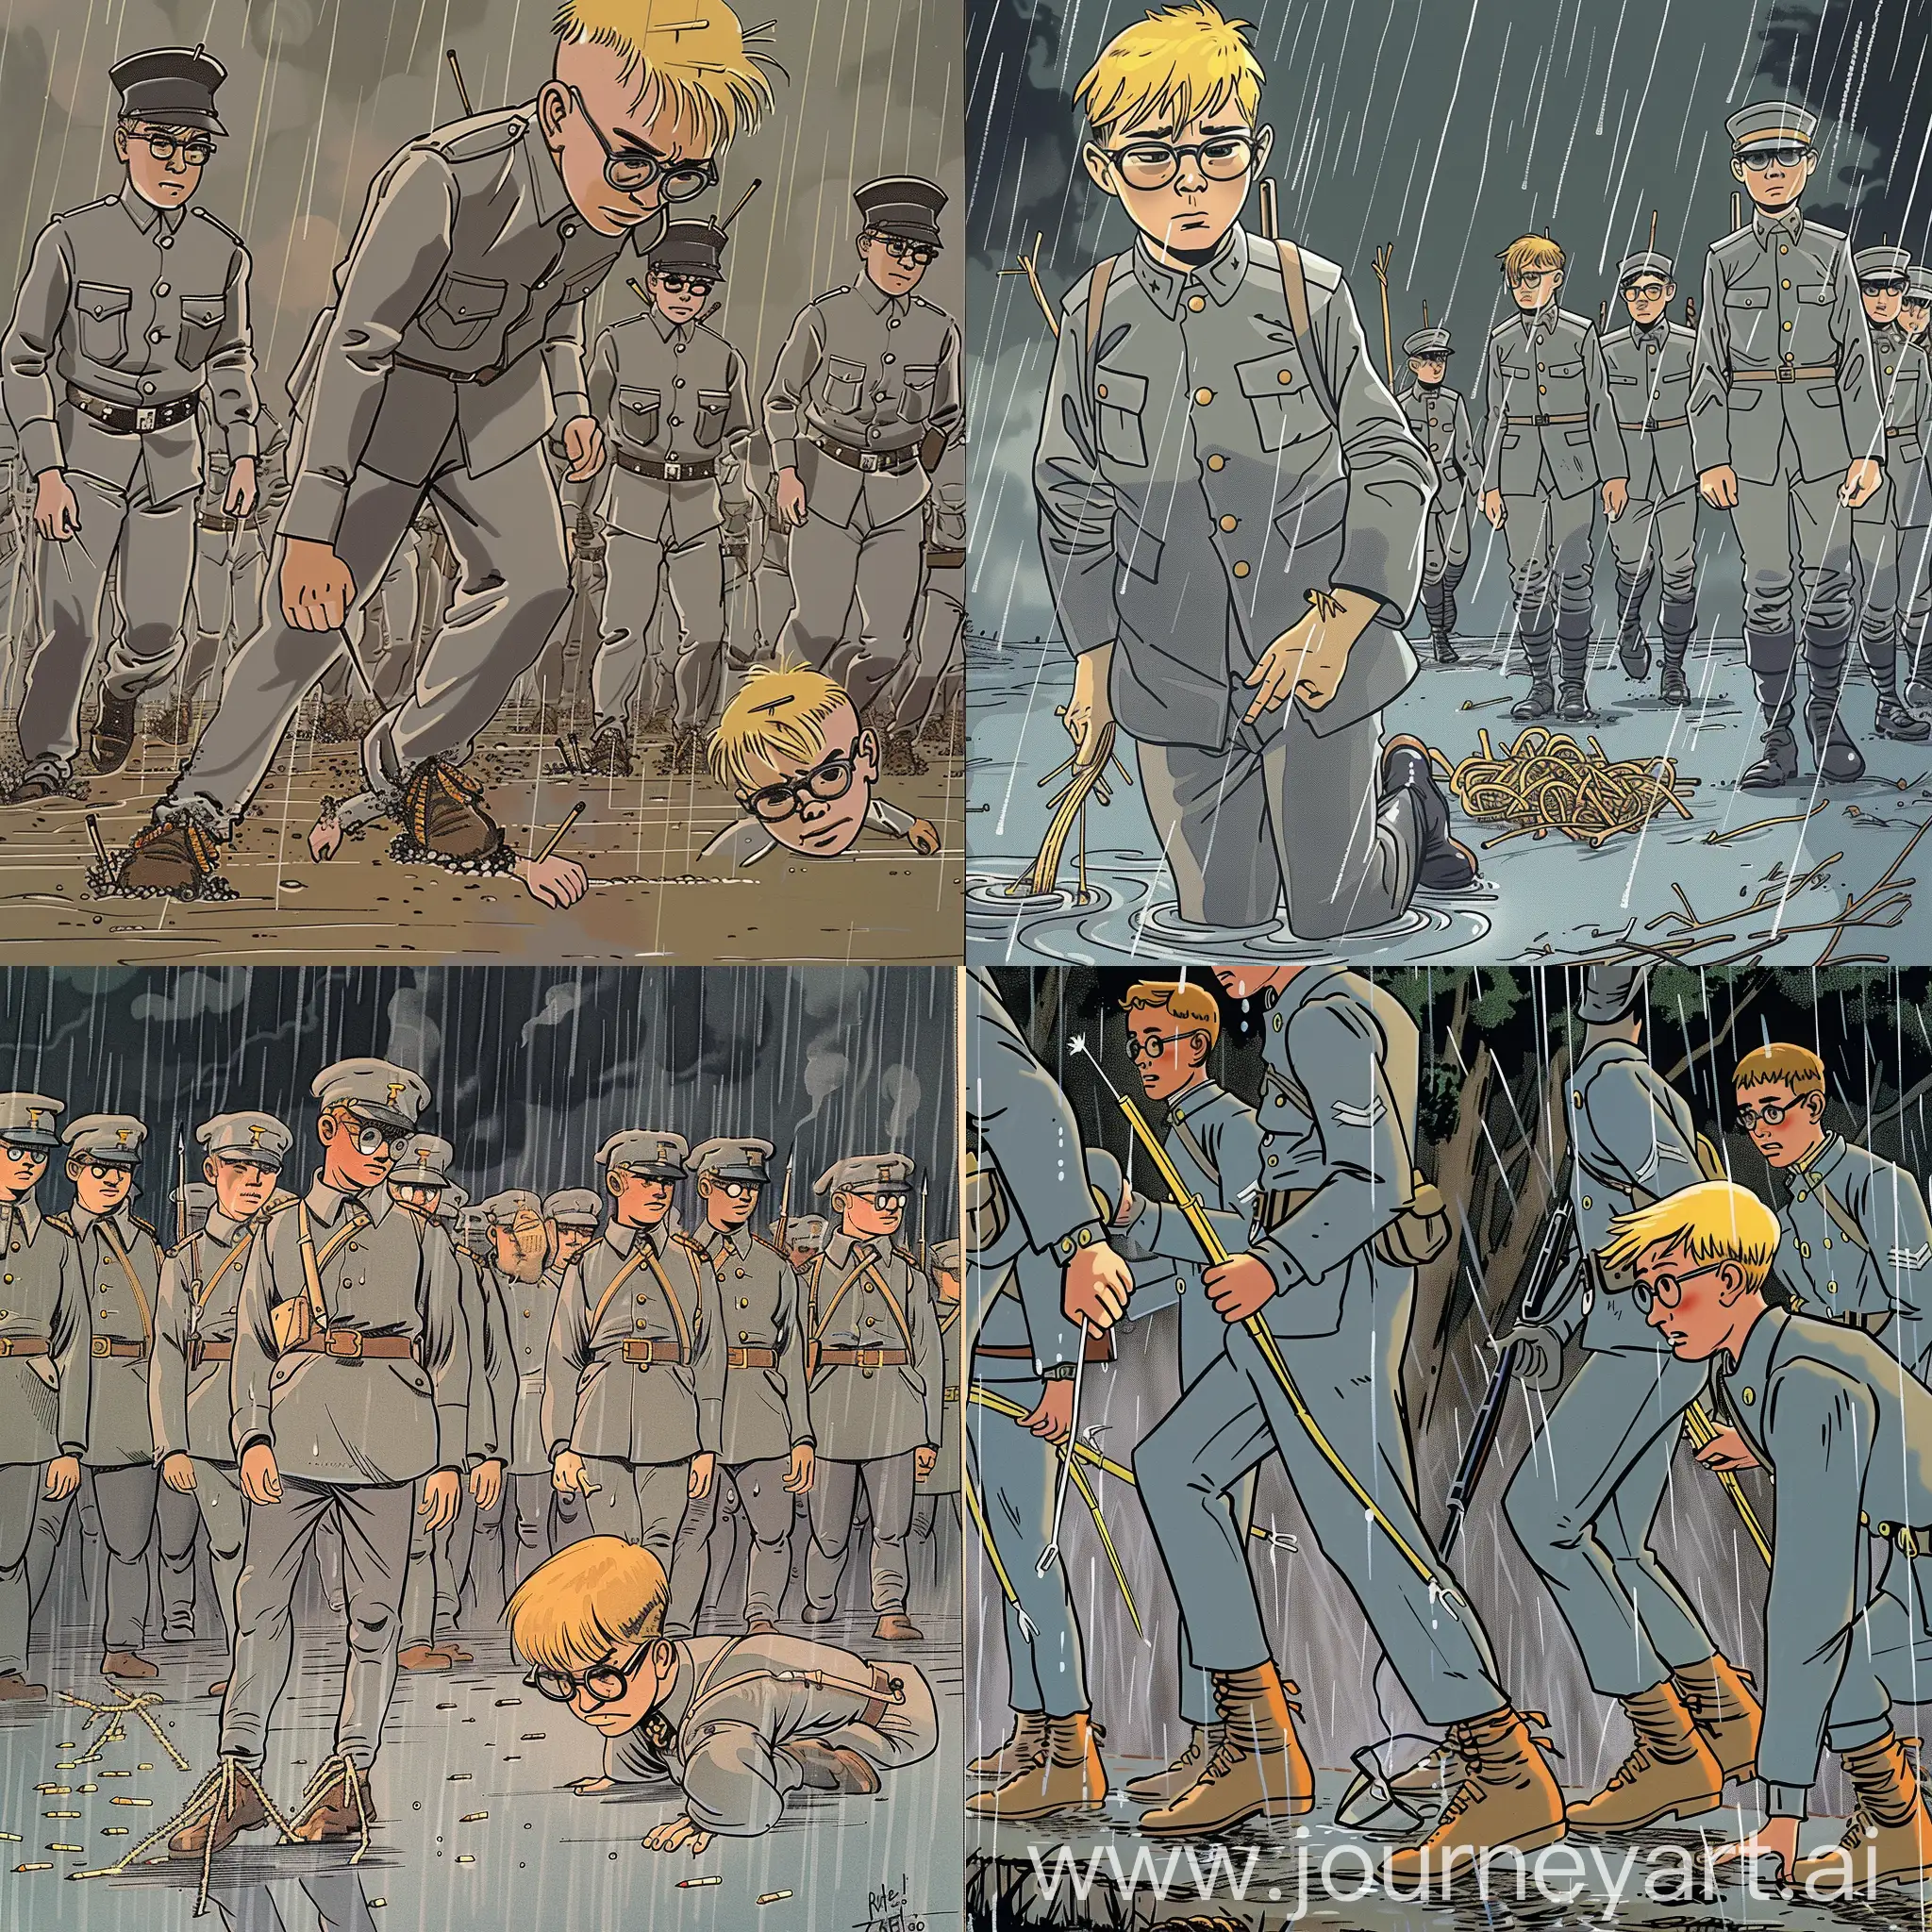 American Civil War illustration, Heavy rain, young men in gray uniforms, small straws sticking out of their shoes, walking on geld, a blond boy with glasses, has fallen, Hergé, flat cartoon color, bold lines, vivid colors